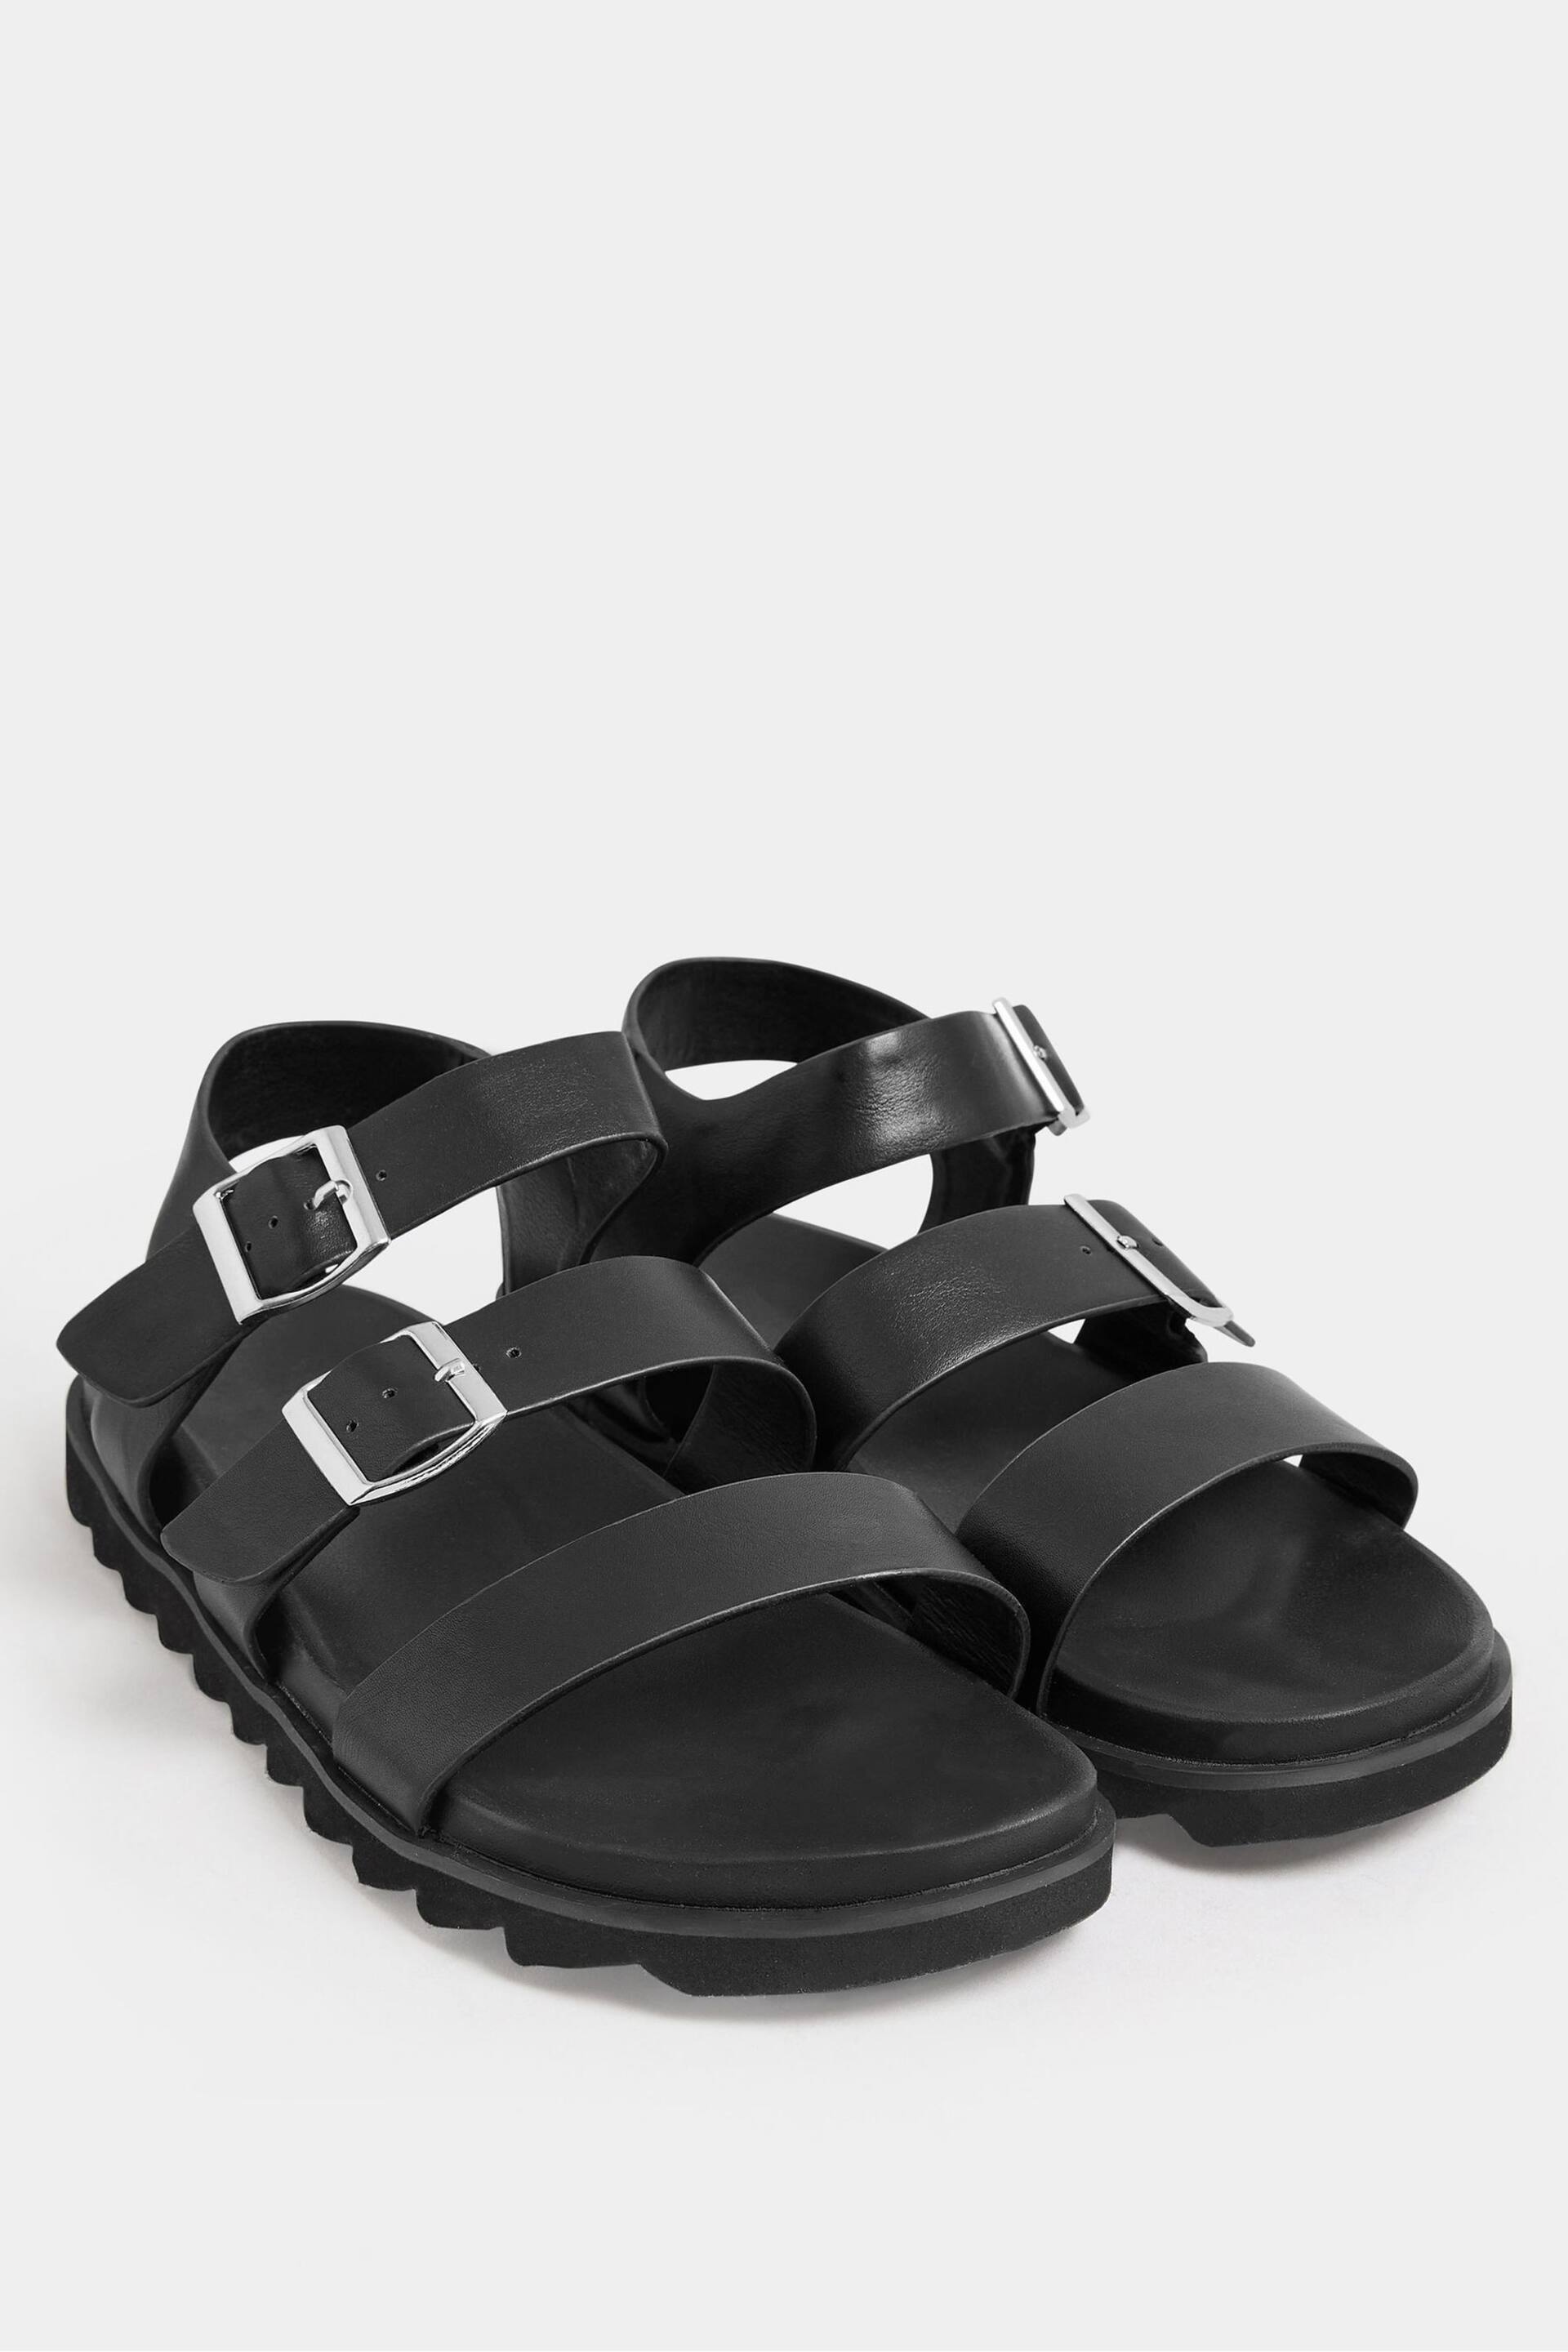 Yours Curve Black White Wide Fit Wide Fit Diamante Flower Sandals - Image 6 of 6